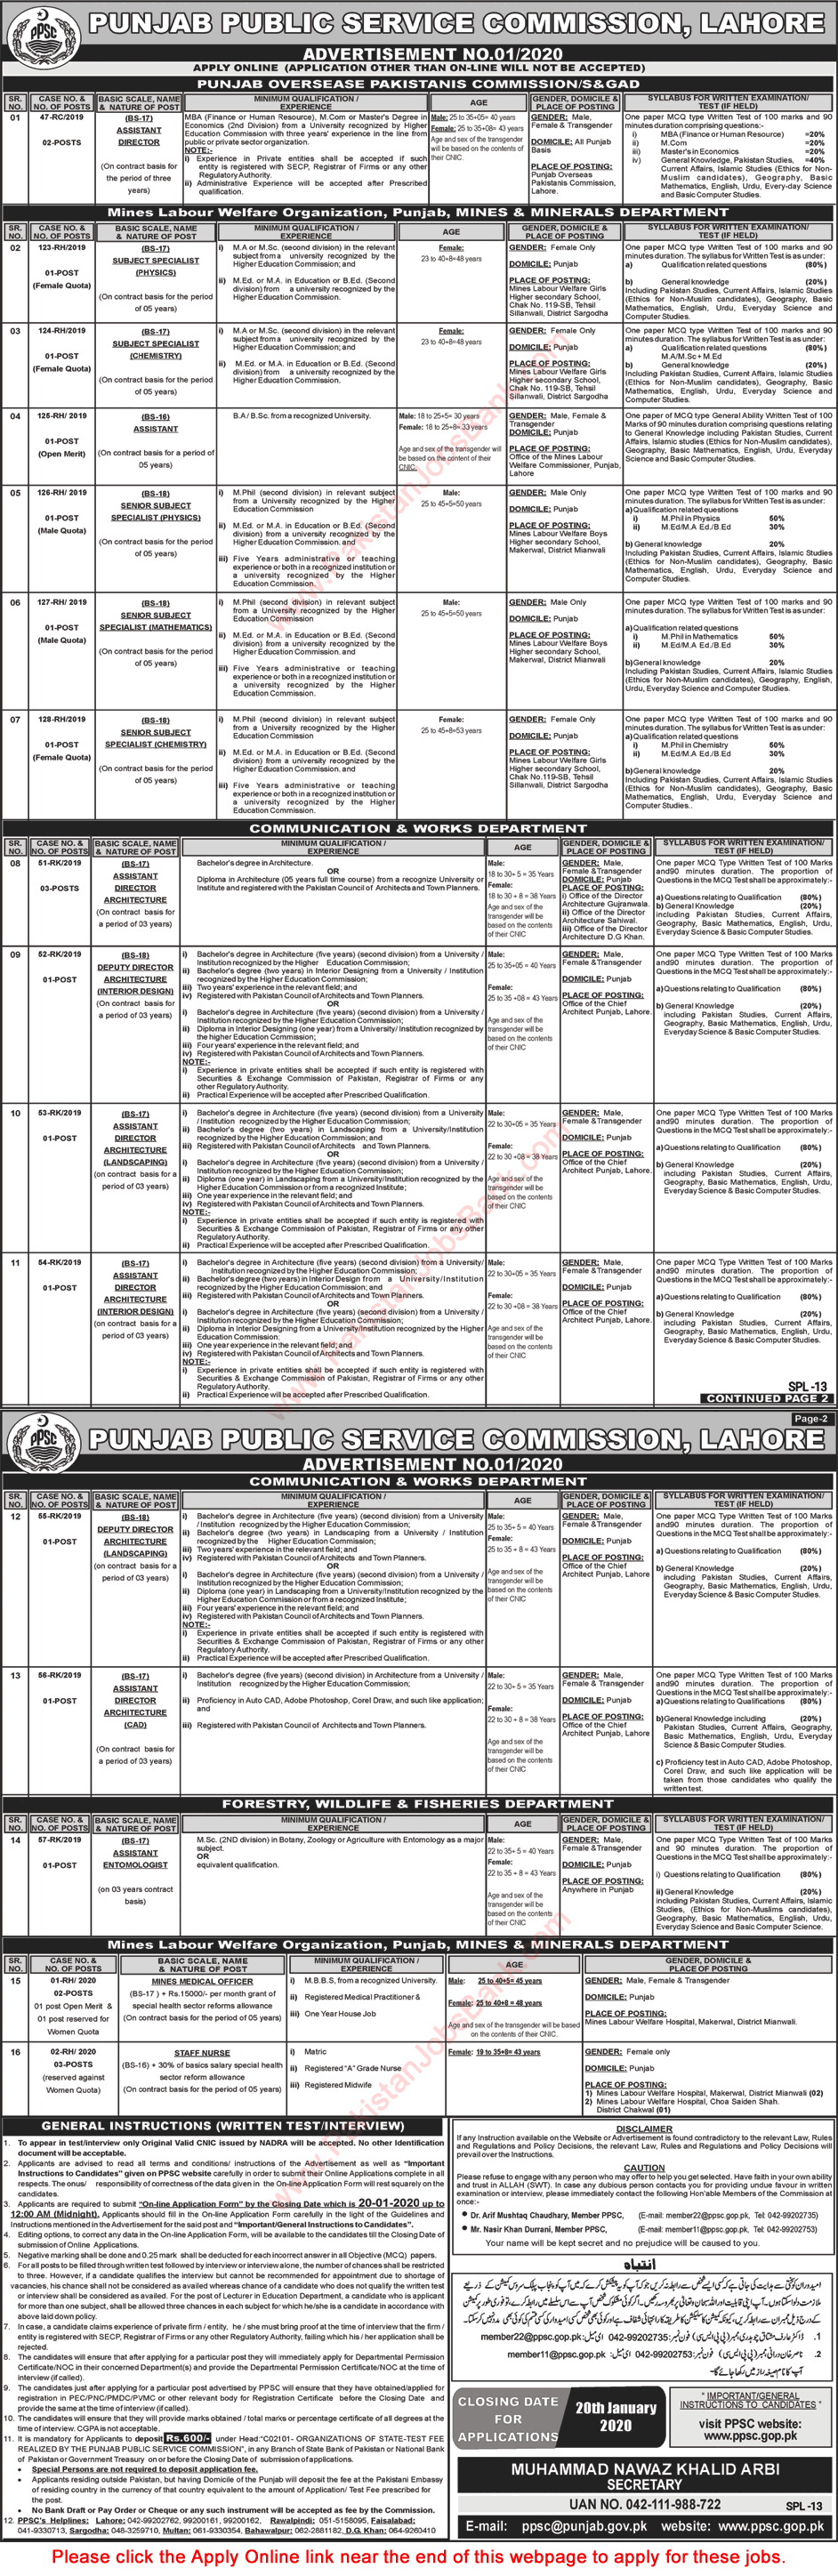 PPSC Jobs 2020 January Apply Online Consolidated Advertisement No 01/2020 1/2020 Latest